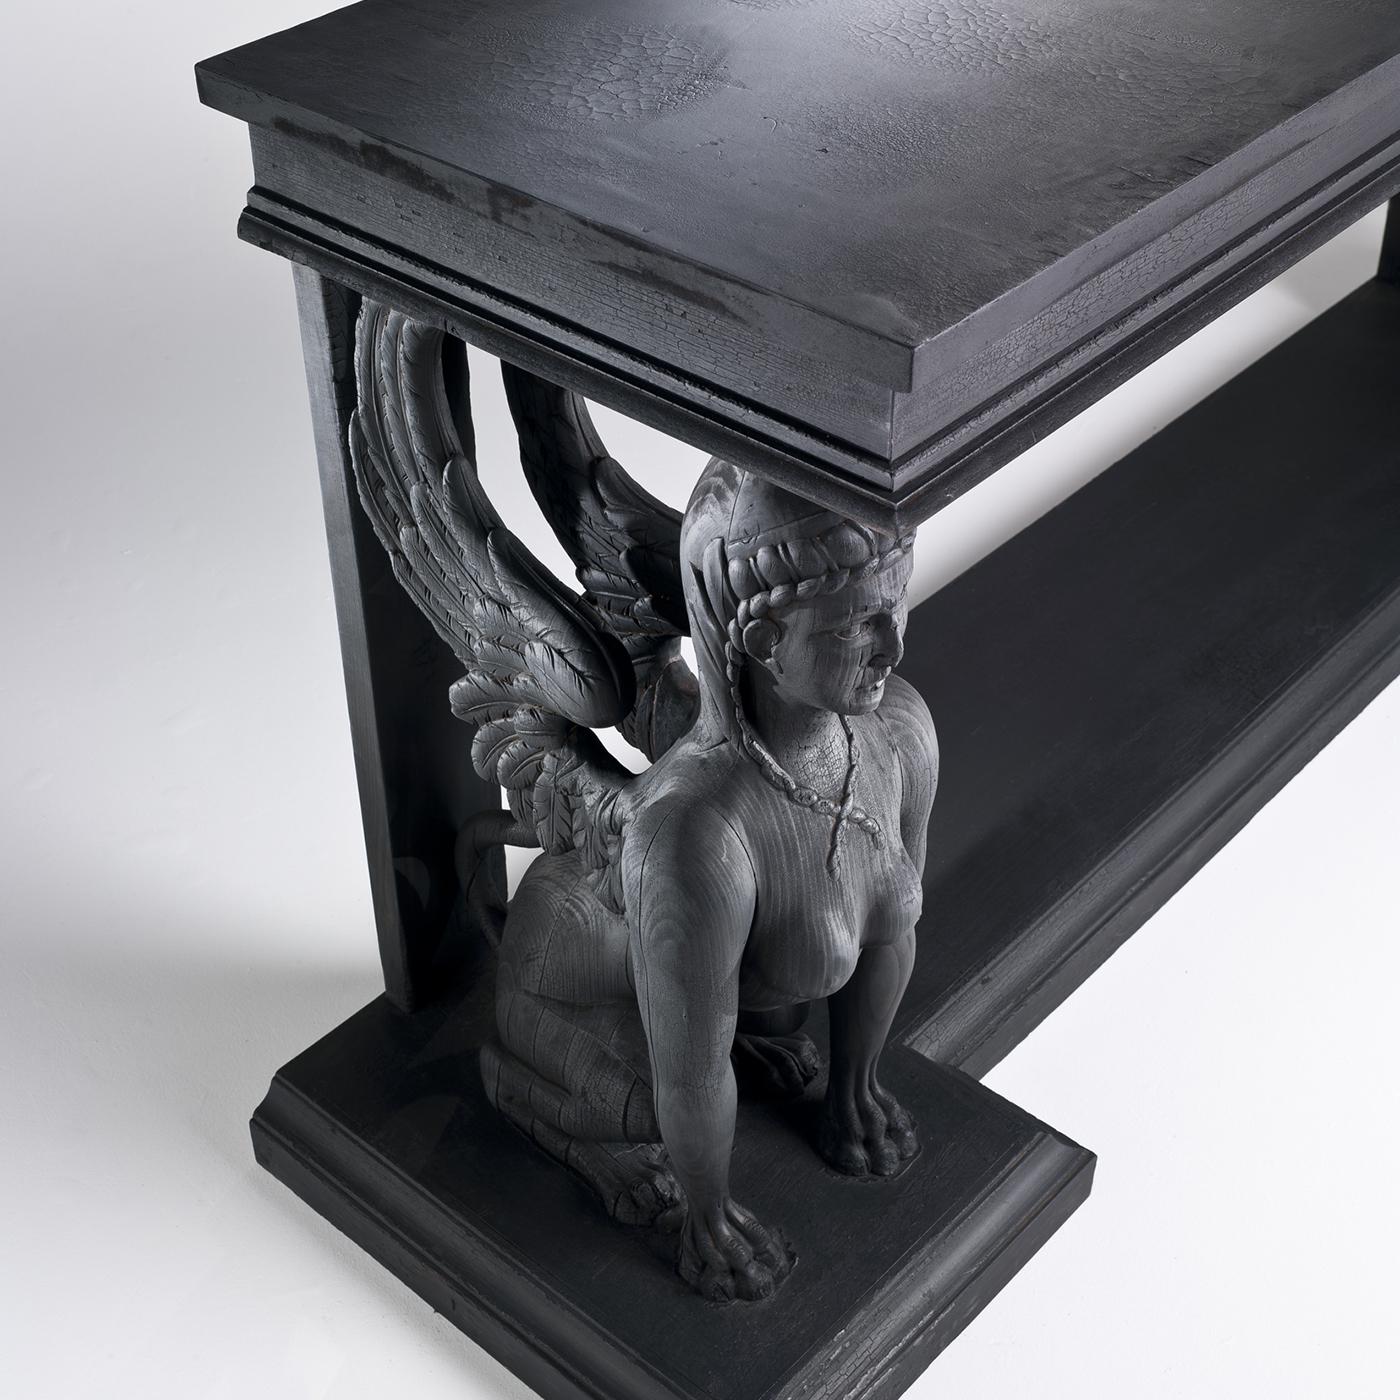 Named after the majestic residence for the French monarchs from Louis VII to Napoleon III, this superb console will be an opulent welcoming piece to showcase in a contemporary entryway or a stately accent to add to a traditional living room. Its